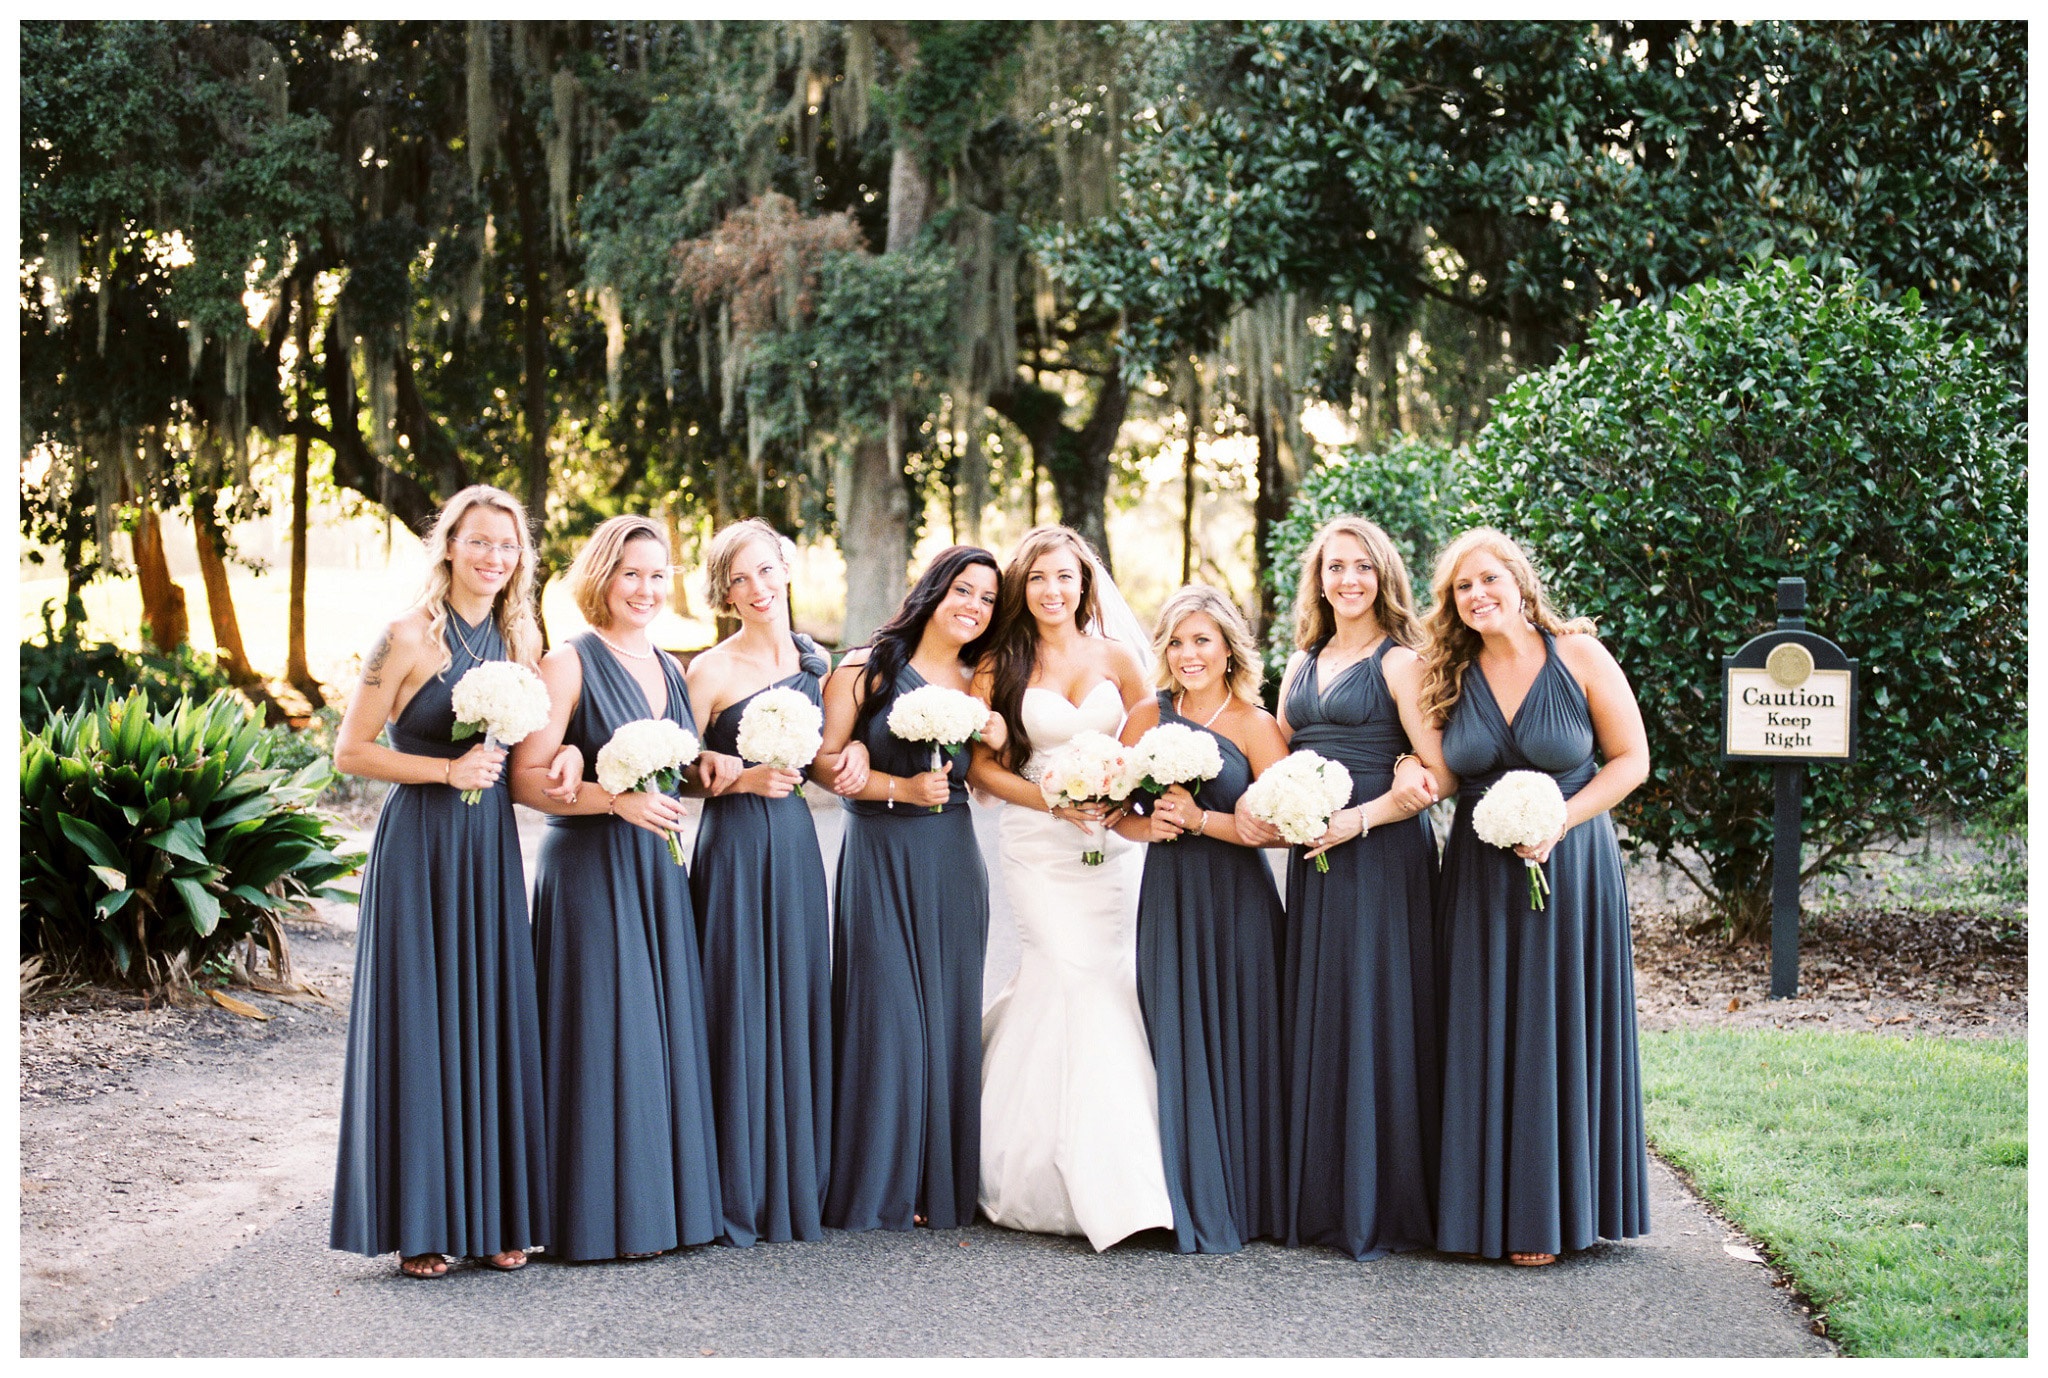 The Bride and her Bridesmaids, Kay and Josh's wedding at the Heritage Plantation, Pawleys Island, South Carolina on September 19, 2015 Heritage Plantation Southern wedding, Pawleys Island, South Carolina Venue and Catering: Heritage Club, Pawleys Island Music: Paul Matthews Entertainment Brides dress: The Little White Dress Cake: Buttercream Cakes and Catering Event Rentals: Eventworks Photographer: One Life Photography